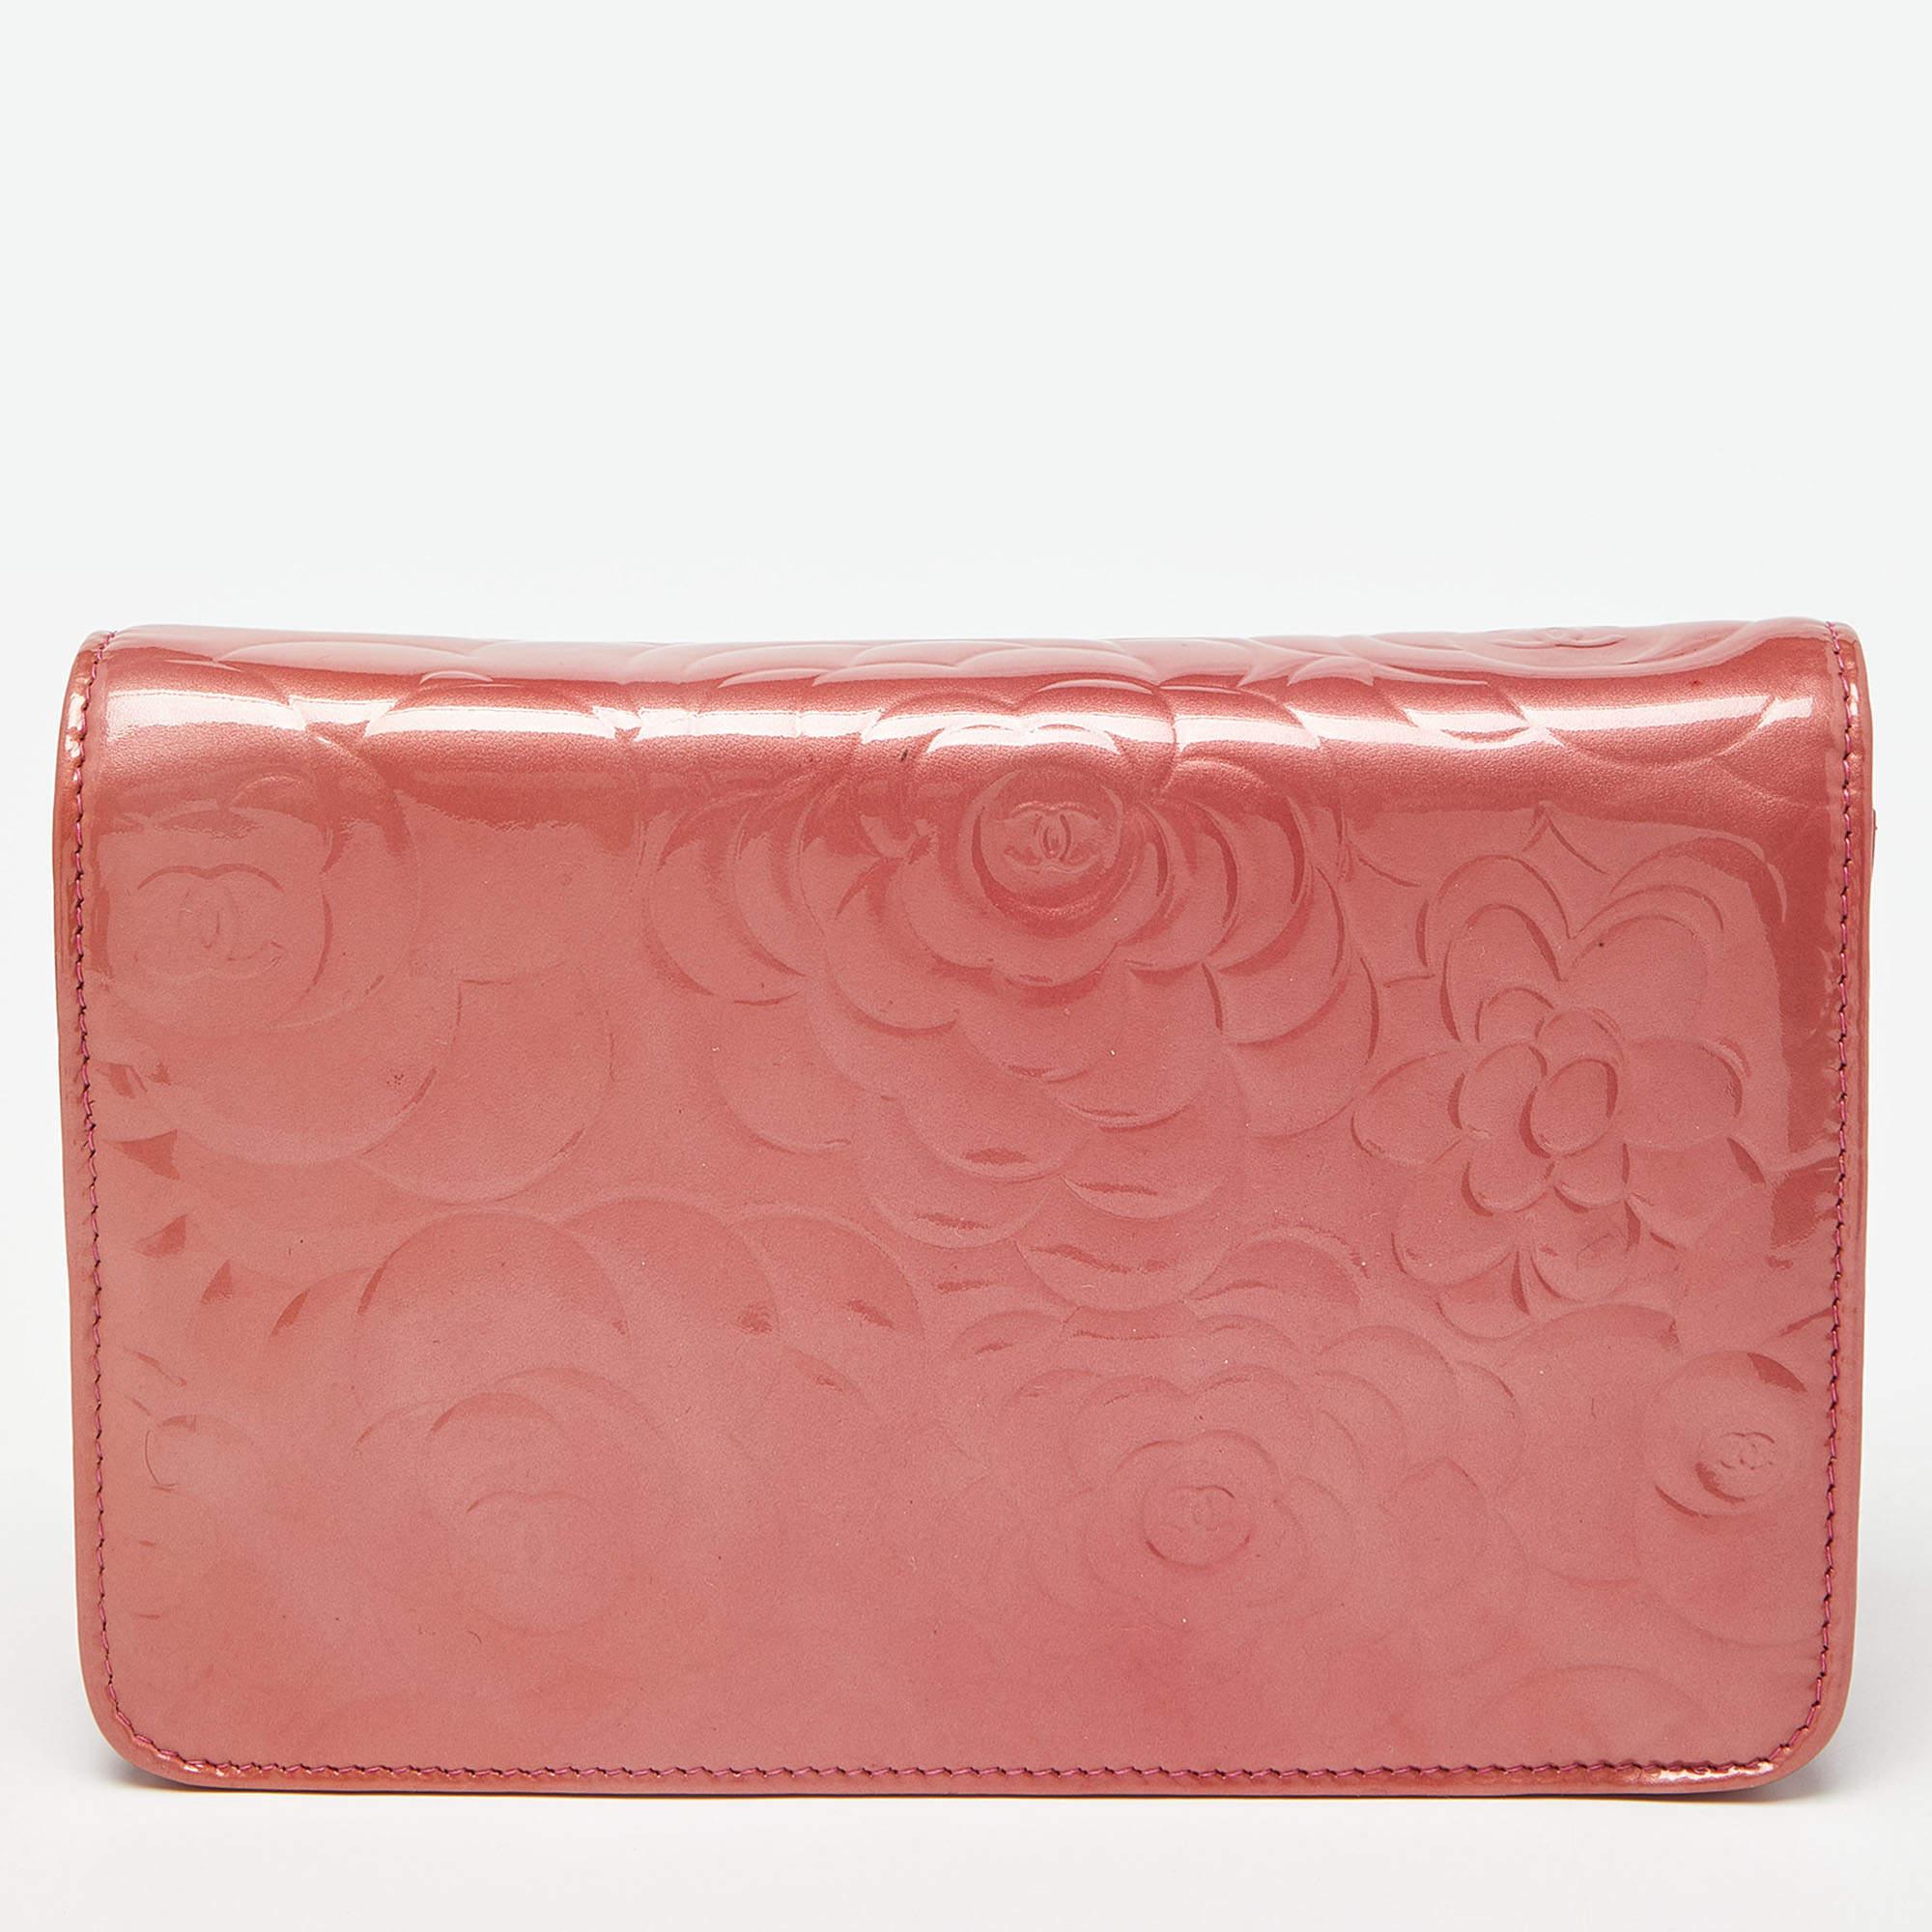 Get the assurance of quality and style that never fades with this Chanel pink Wallet On Chain. It is sewn using patent & leather and the interior has a wallet-like layout with space for cards, cash, and coins. The Chanel WOC is complete with a